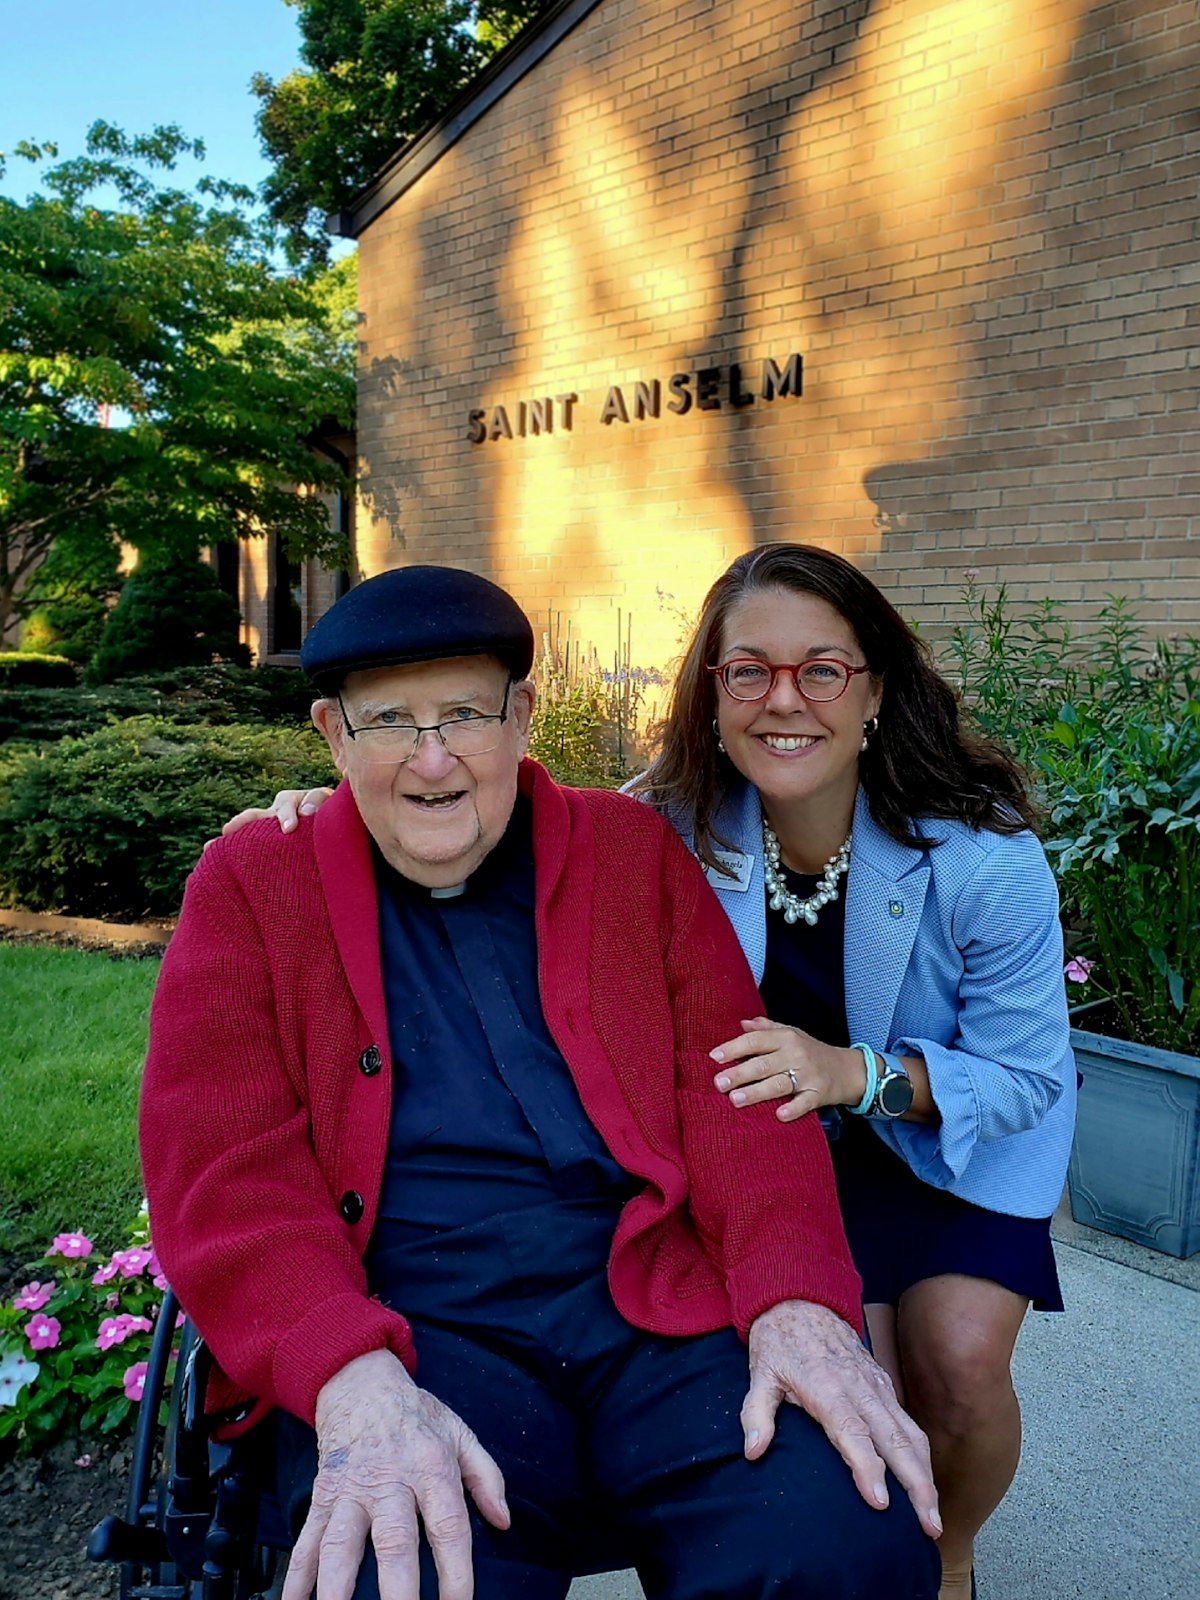 Msgr. James Moloney with his niece, Angela Moloney, president and CEO of the Catholic Foundation of Michigan. Angela Moloney said Msgr. Moloney was a big inspiration for her and her entire family, with his steadfast commitment to missions around the world and St. Anselm Parish in Dearborn Heights. (courtesy photo)